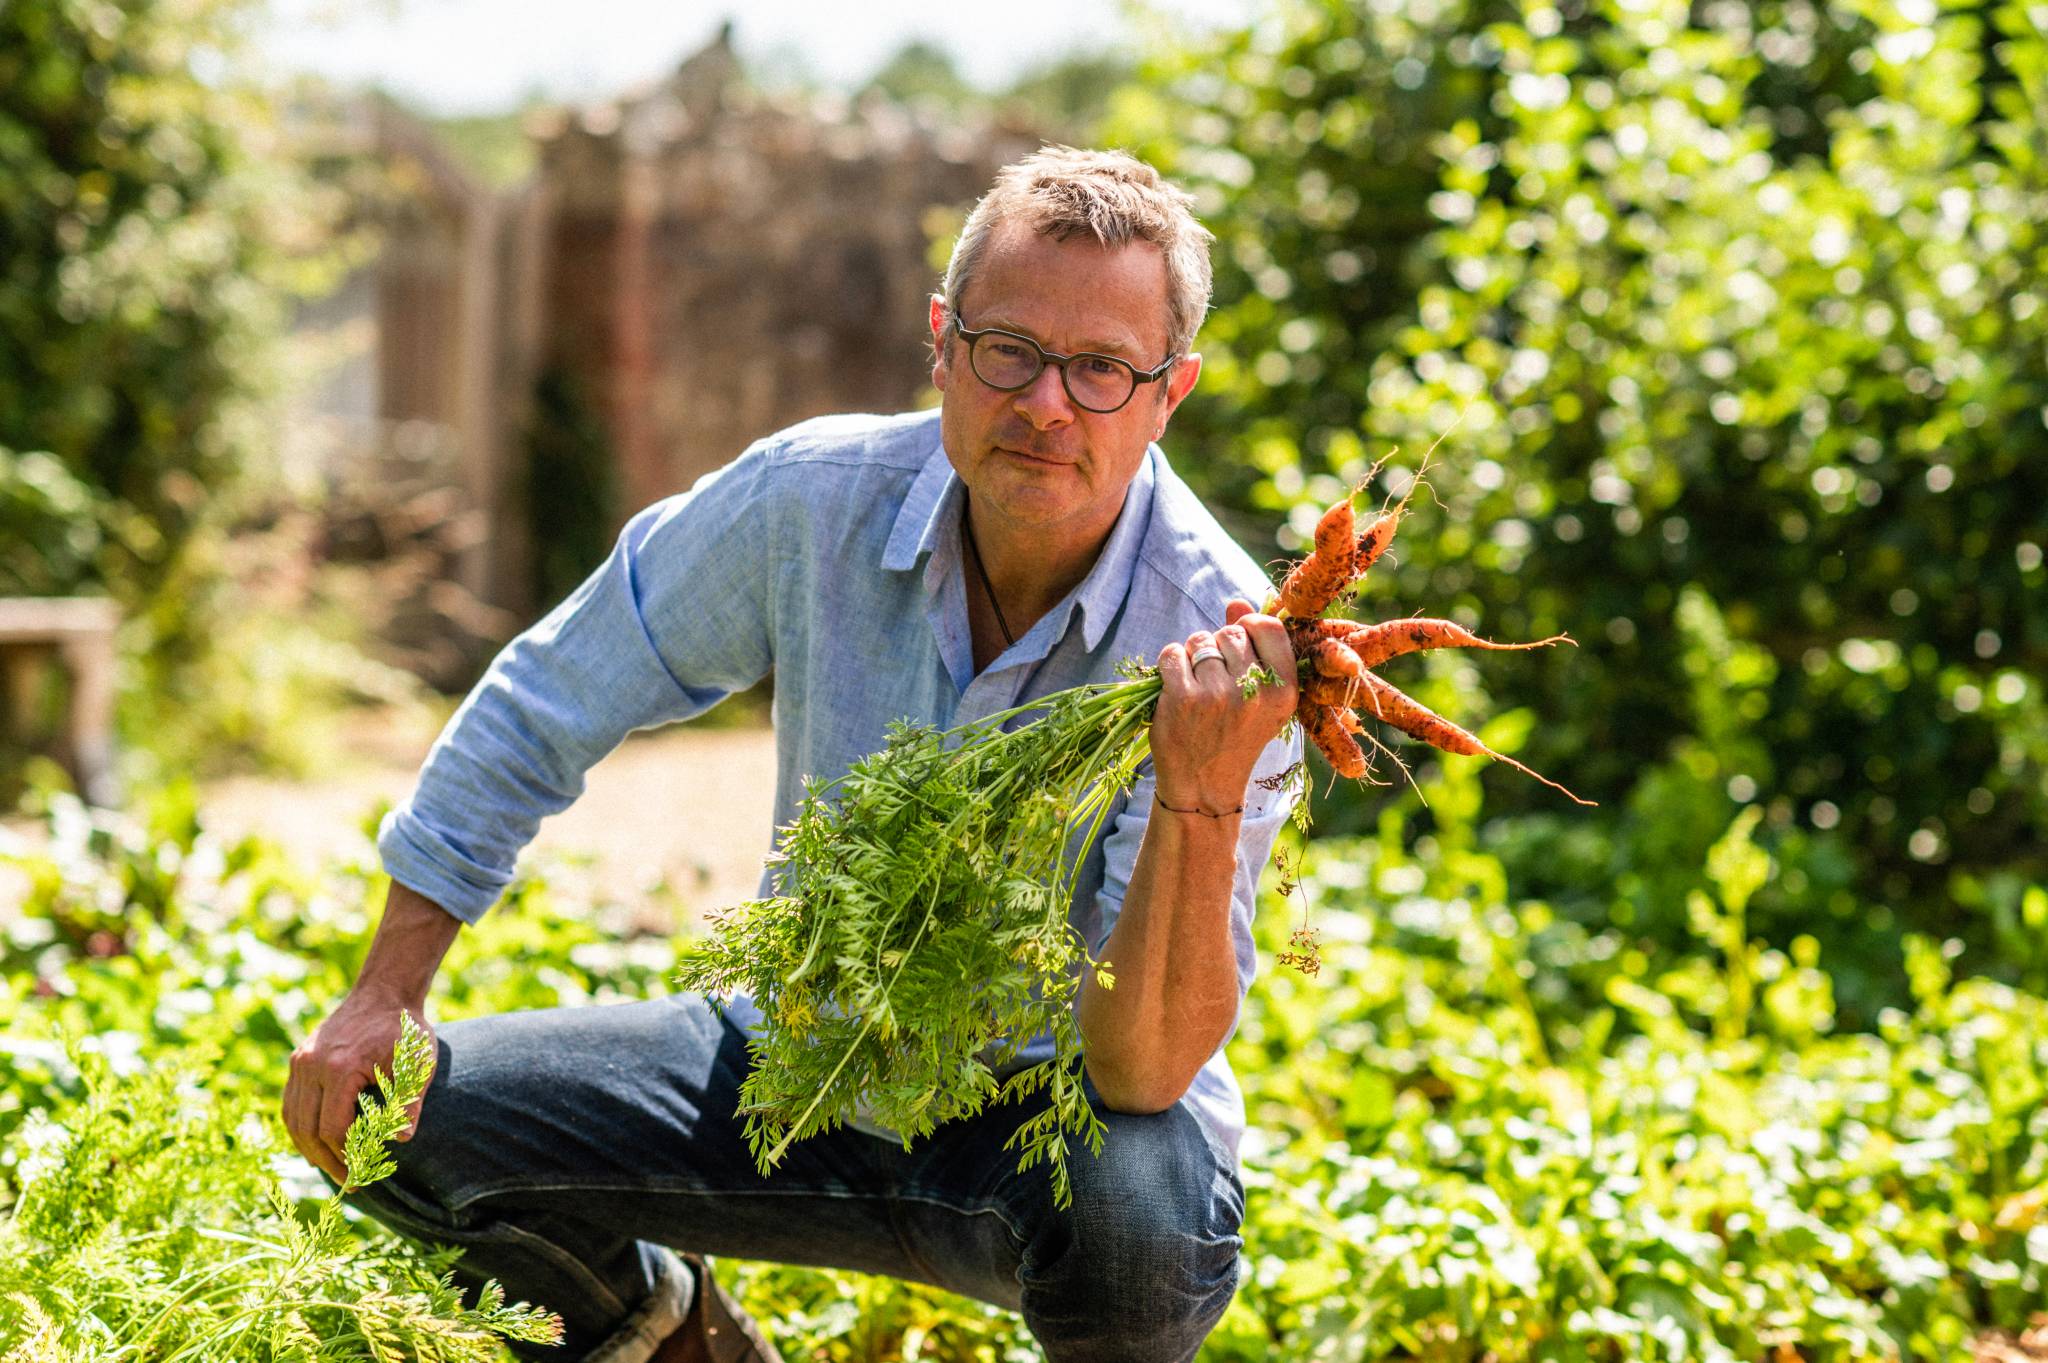 We are a double helping of excited to welcome Hugh Fearnley-Whittingstall